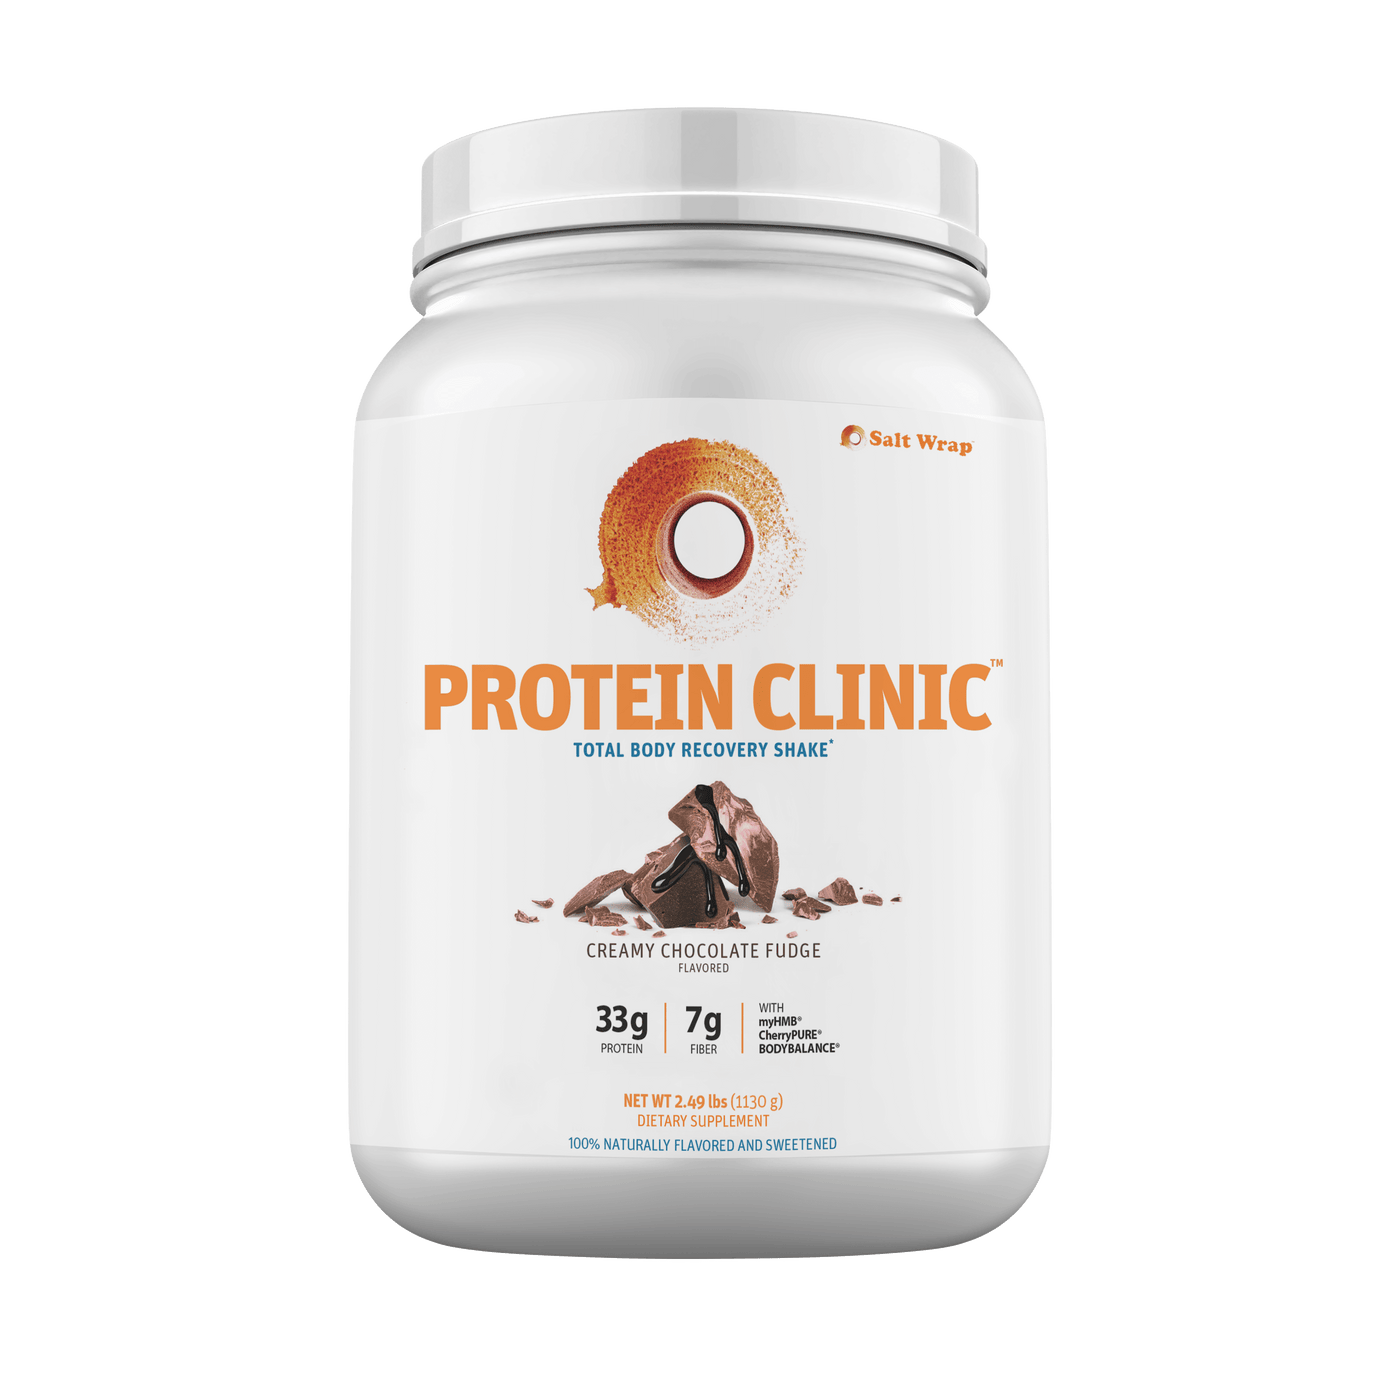 With Protein Clinic™, you can unlock your natural muscle-building potential with one convenient, delicious shake.